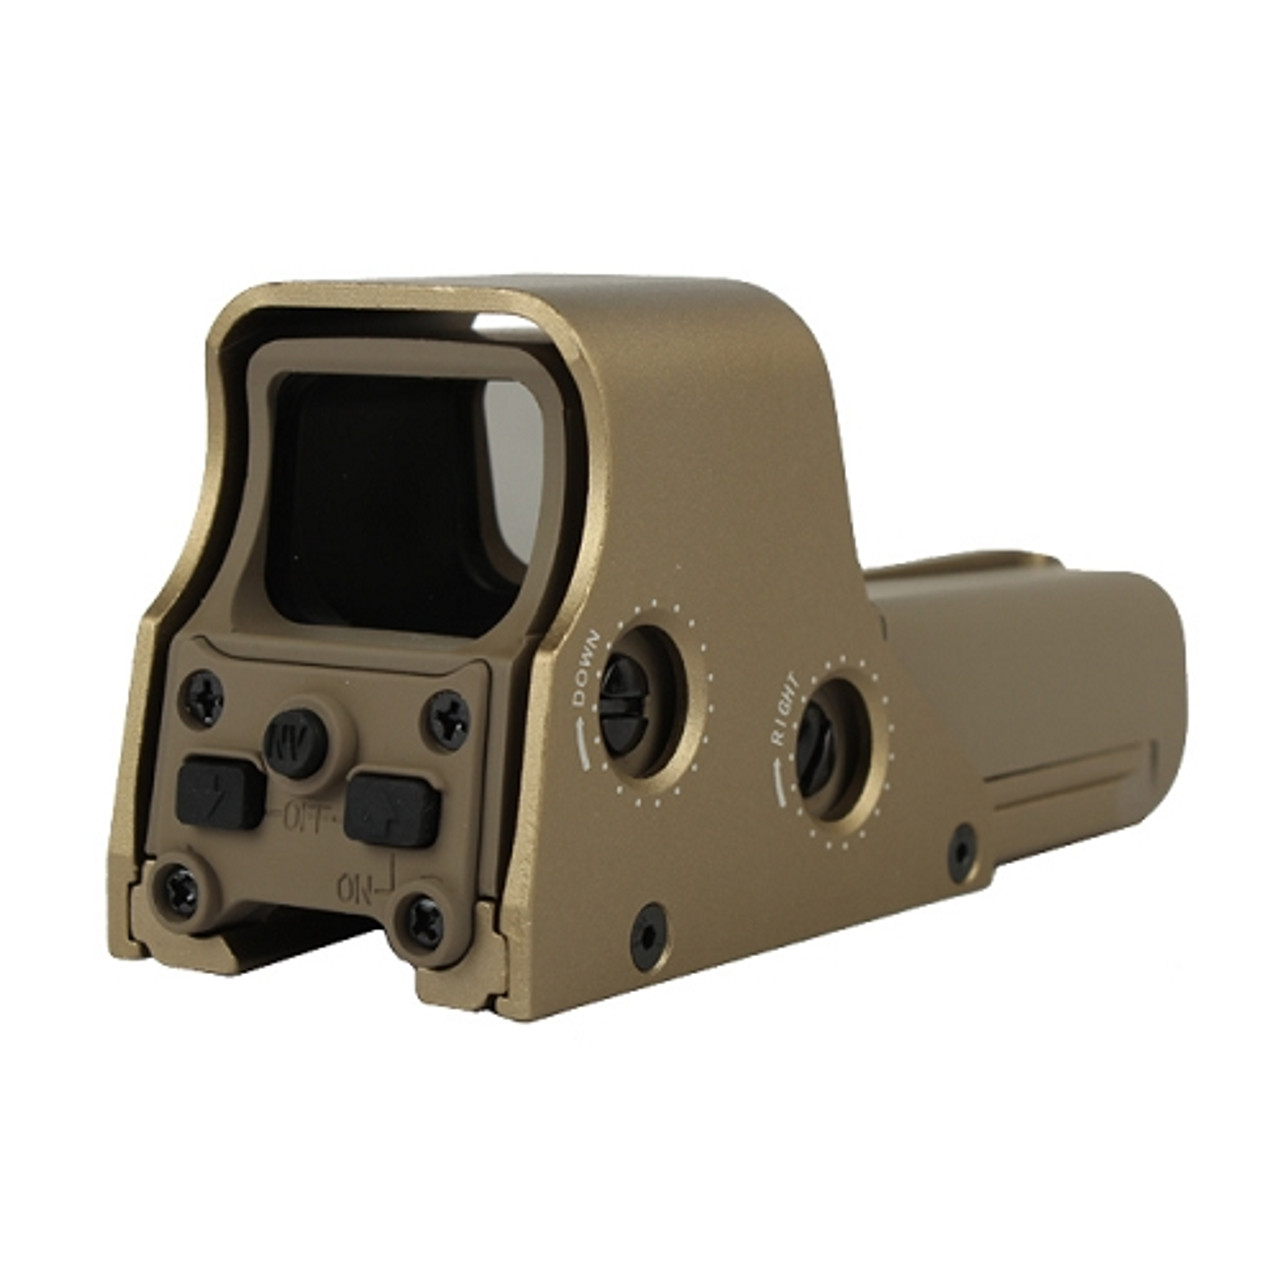 Download Killhouse 552 Mock Holographic Tan | Defcon Paintball Store